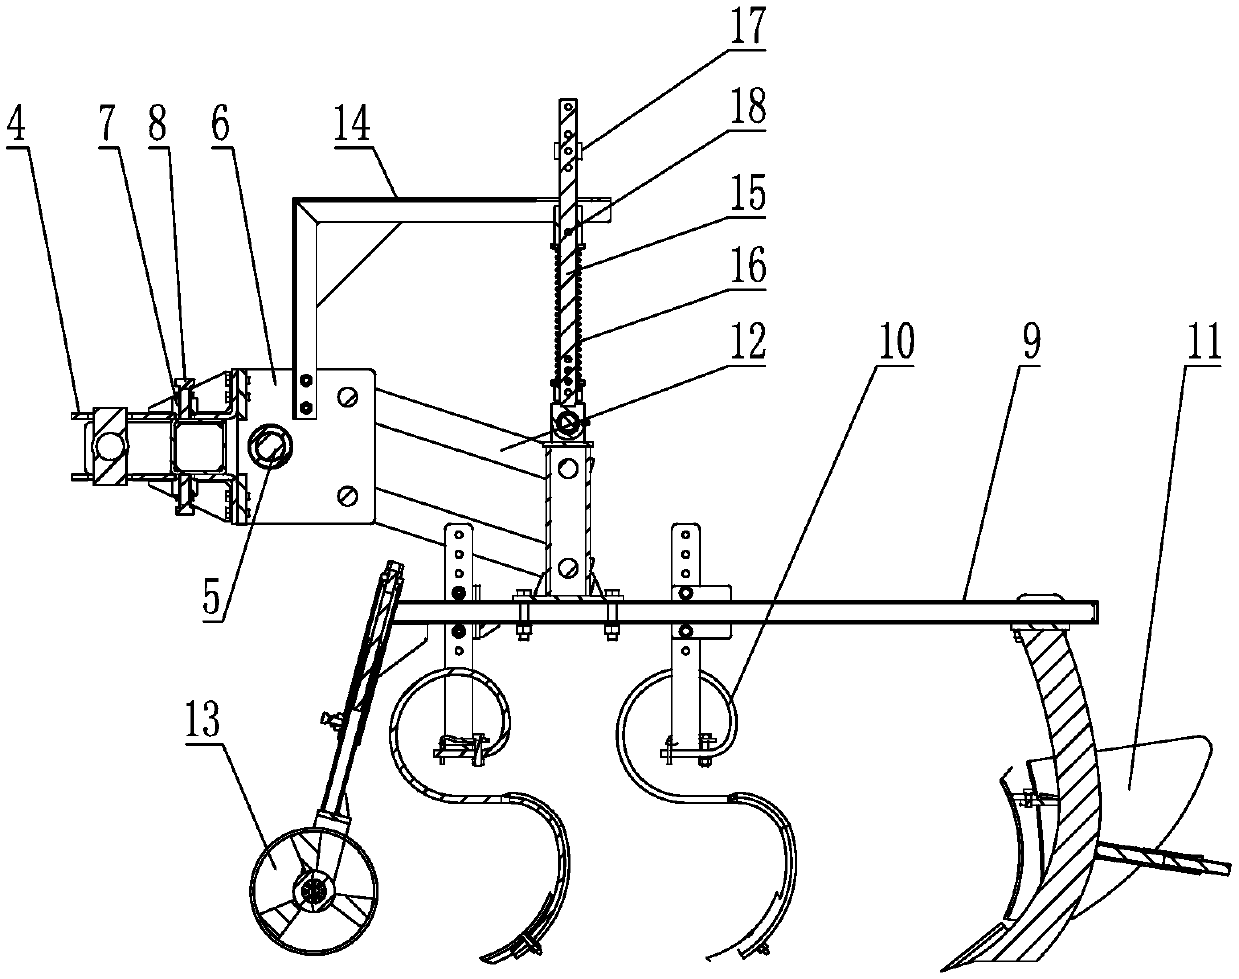 Cultivator-hiller capable of automatically and steplessly adjusting line spacing